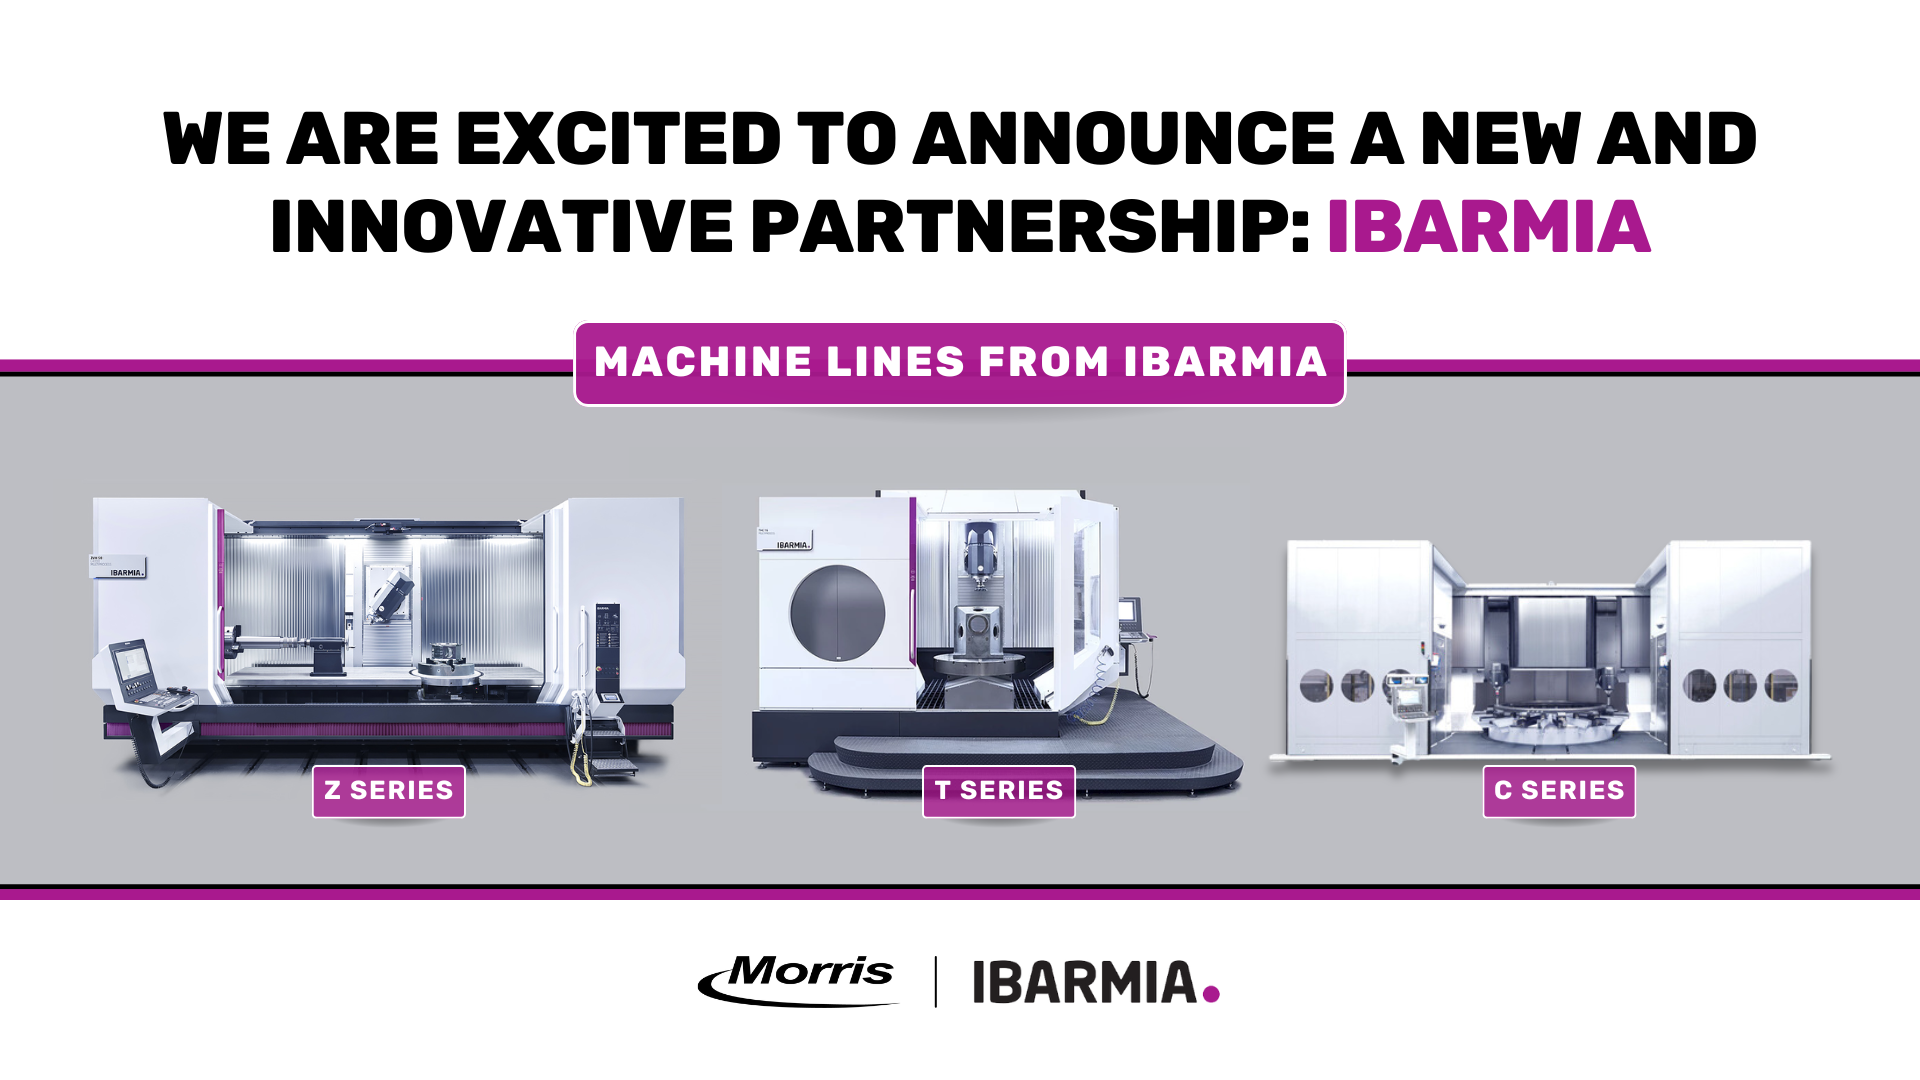 New Partnership with Morris, Ibarmia, and the different machines that the offer - Z Series, T Series and C Series